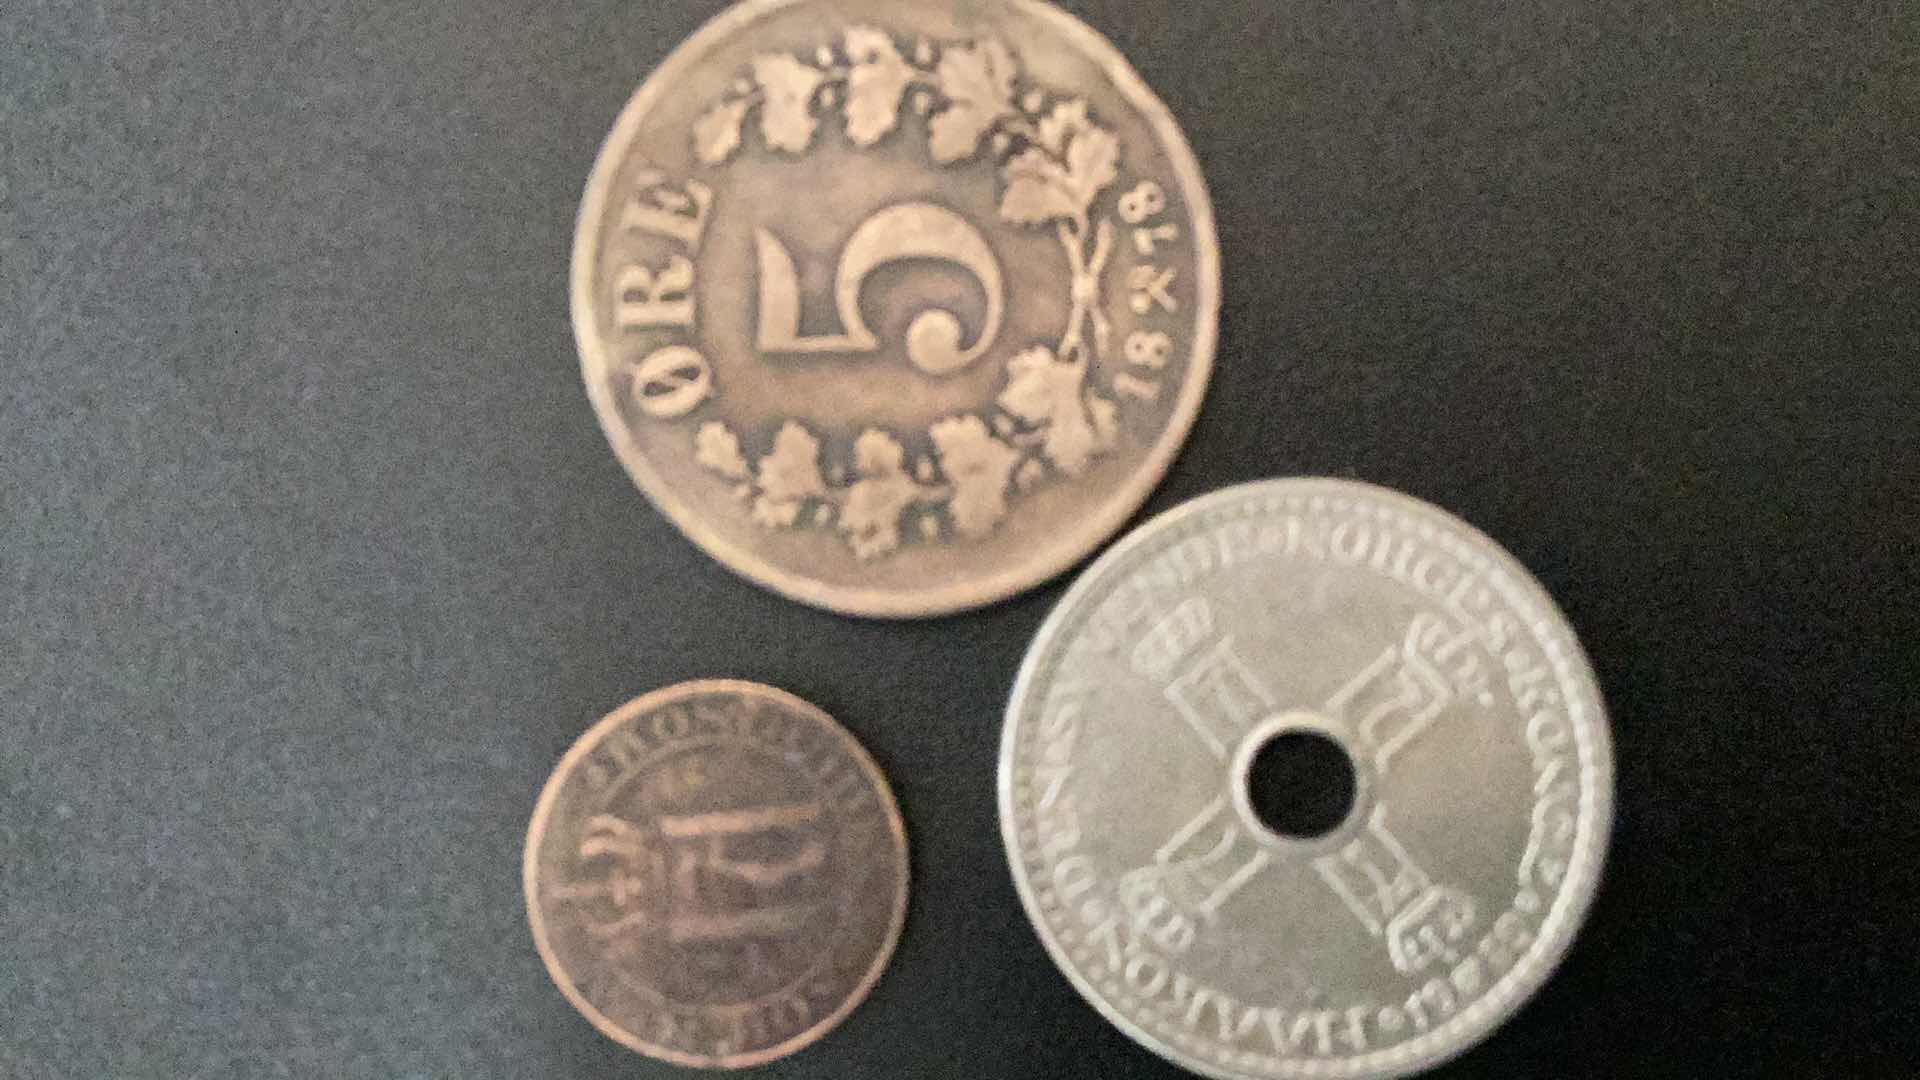 Photo 1 of 3 COLLECTIBLE COINS - NORWAY 1878, 1927, 1939